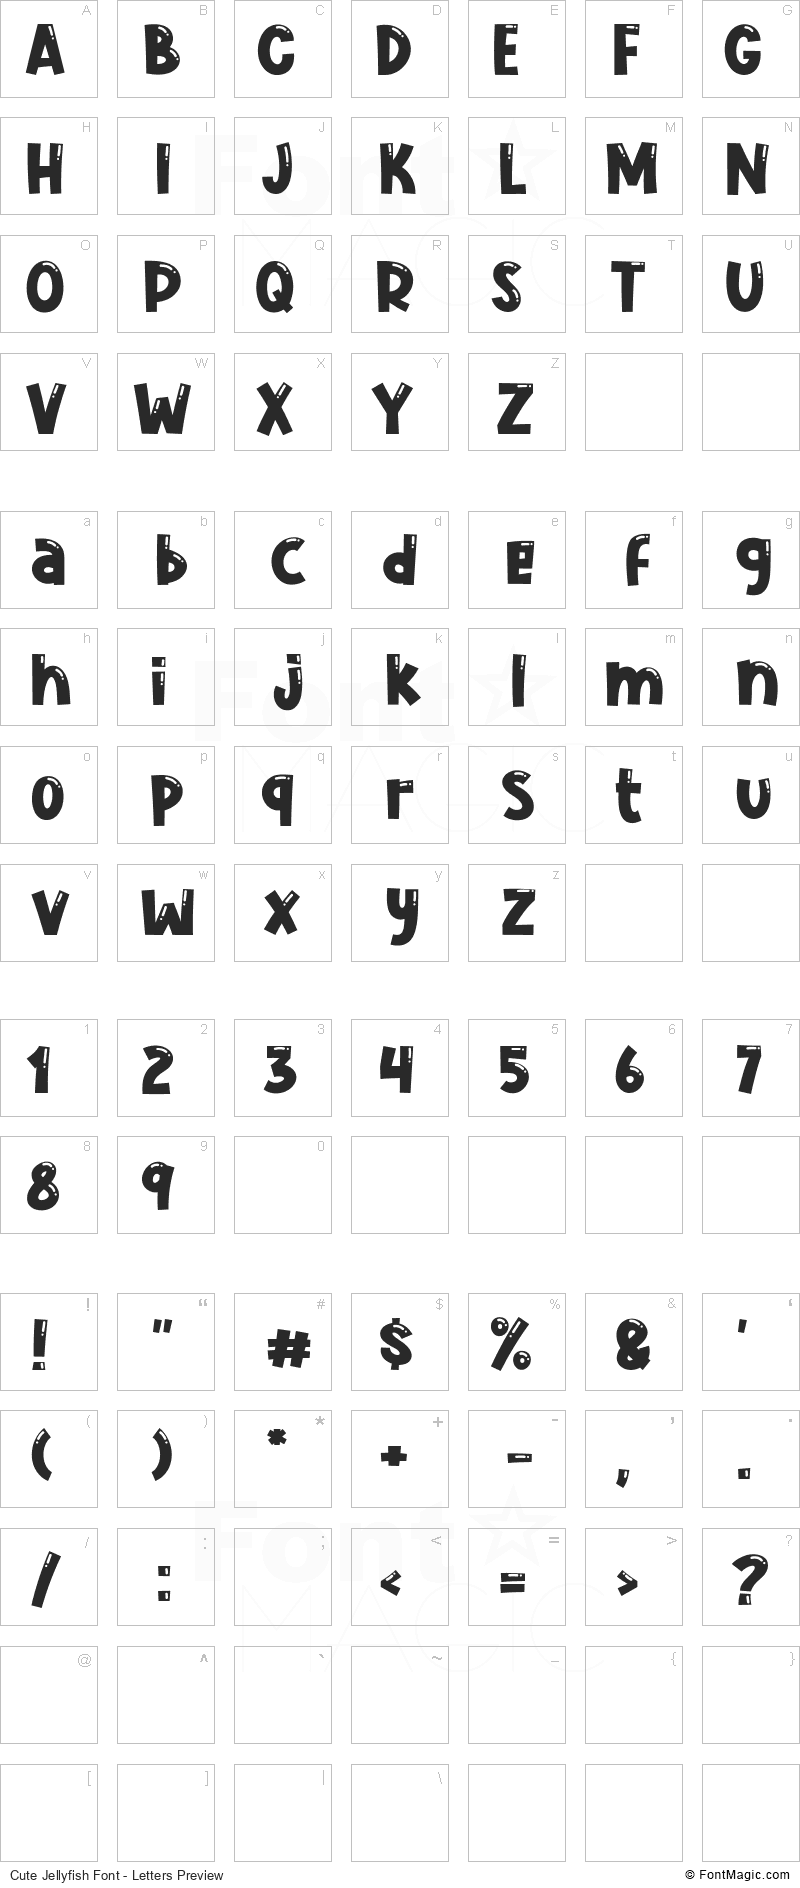 Cute Jellyfish Font - All Latters Preview Chart